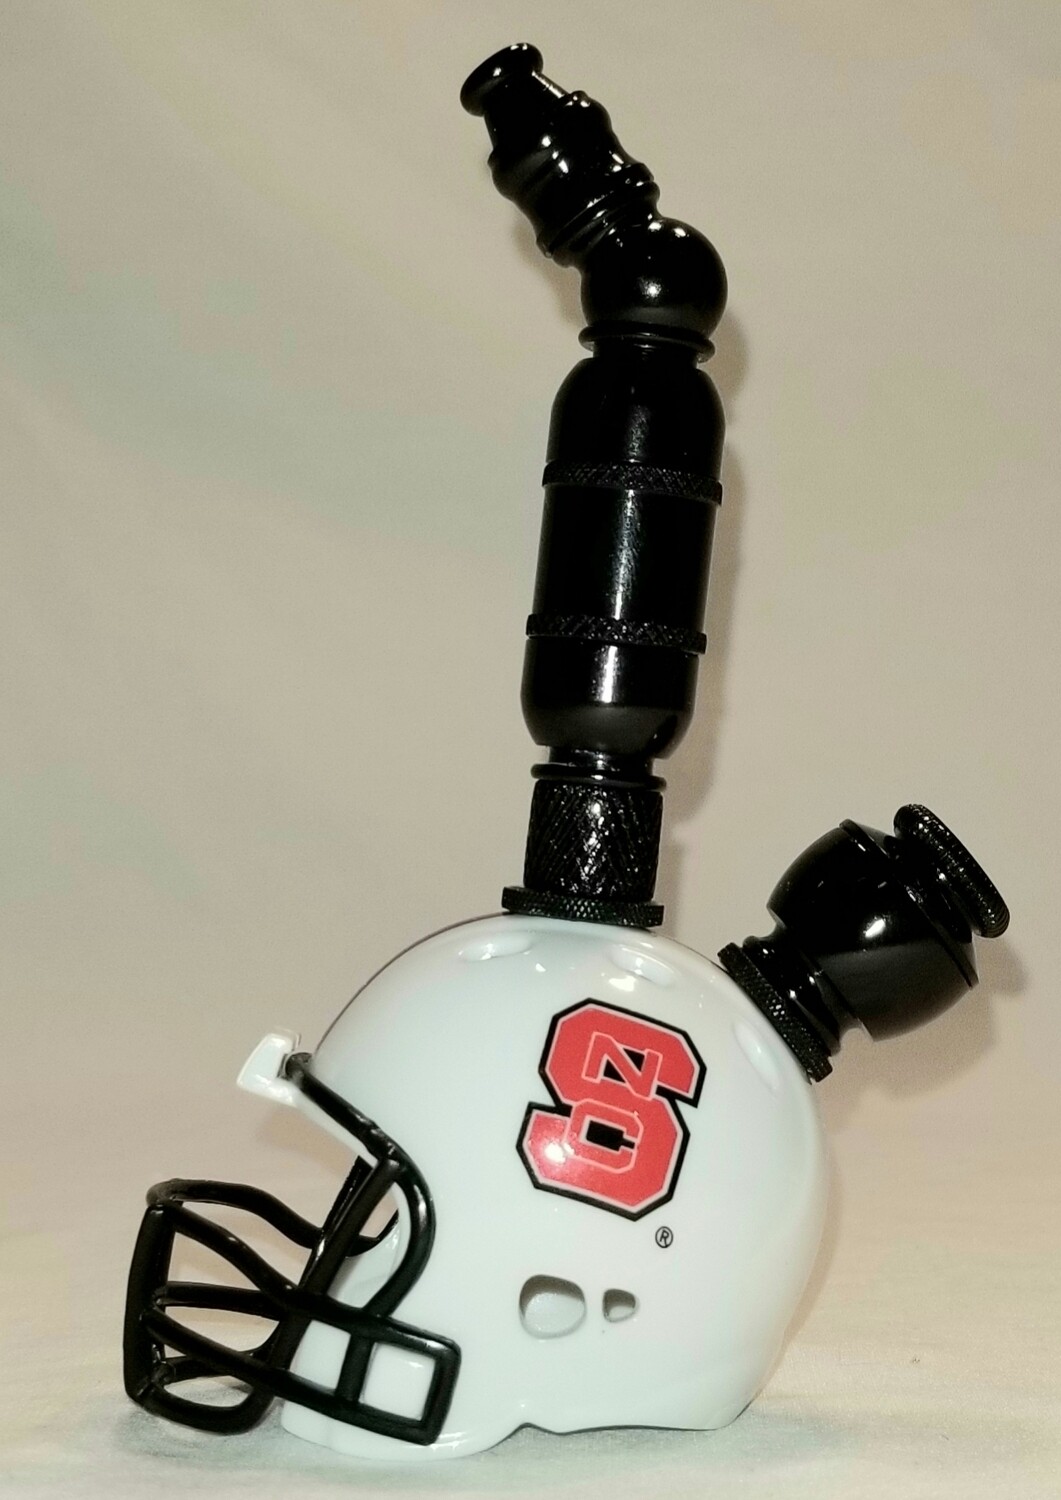 NORTH CAROLINA STATE WOLF PACK "BAD ASS" FOOTBALL HELMET SMOKING PIPE Upright/Black Anodized/White